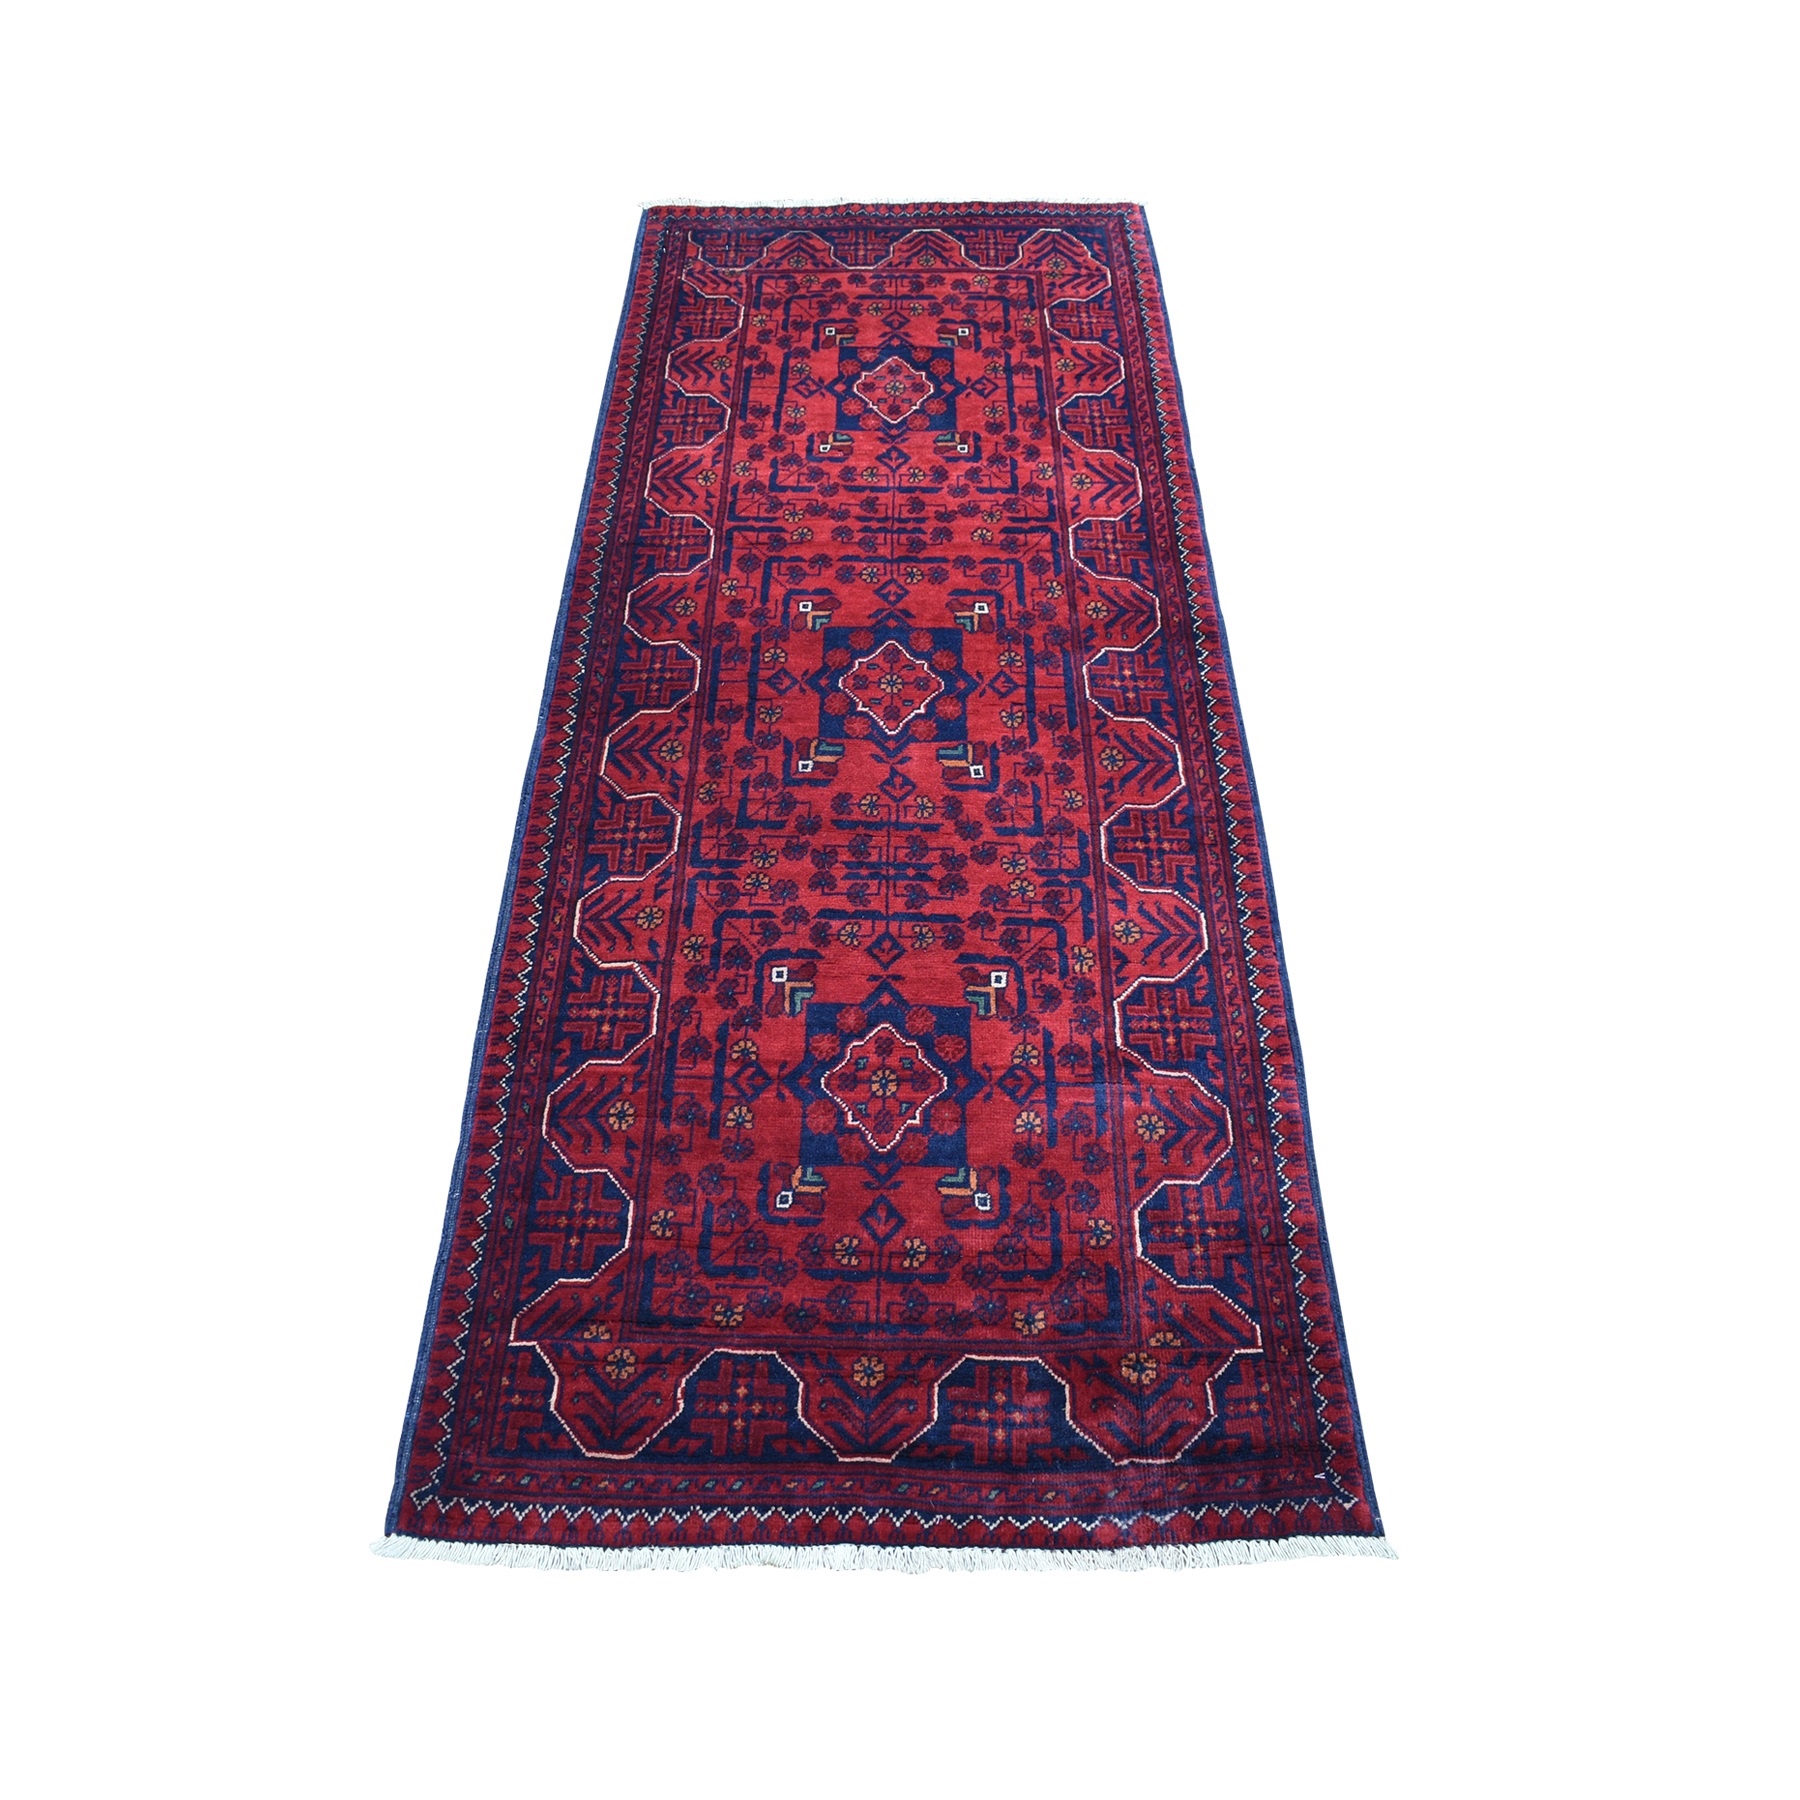 2'5"x6'3" Saturated Red with Pop of Navy Blue Afghan Khamyab Hand Woven Soft Natural Wool Runner Oriental Rug 